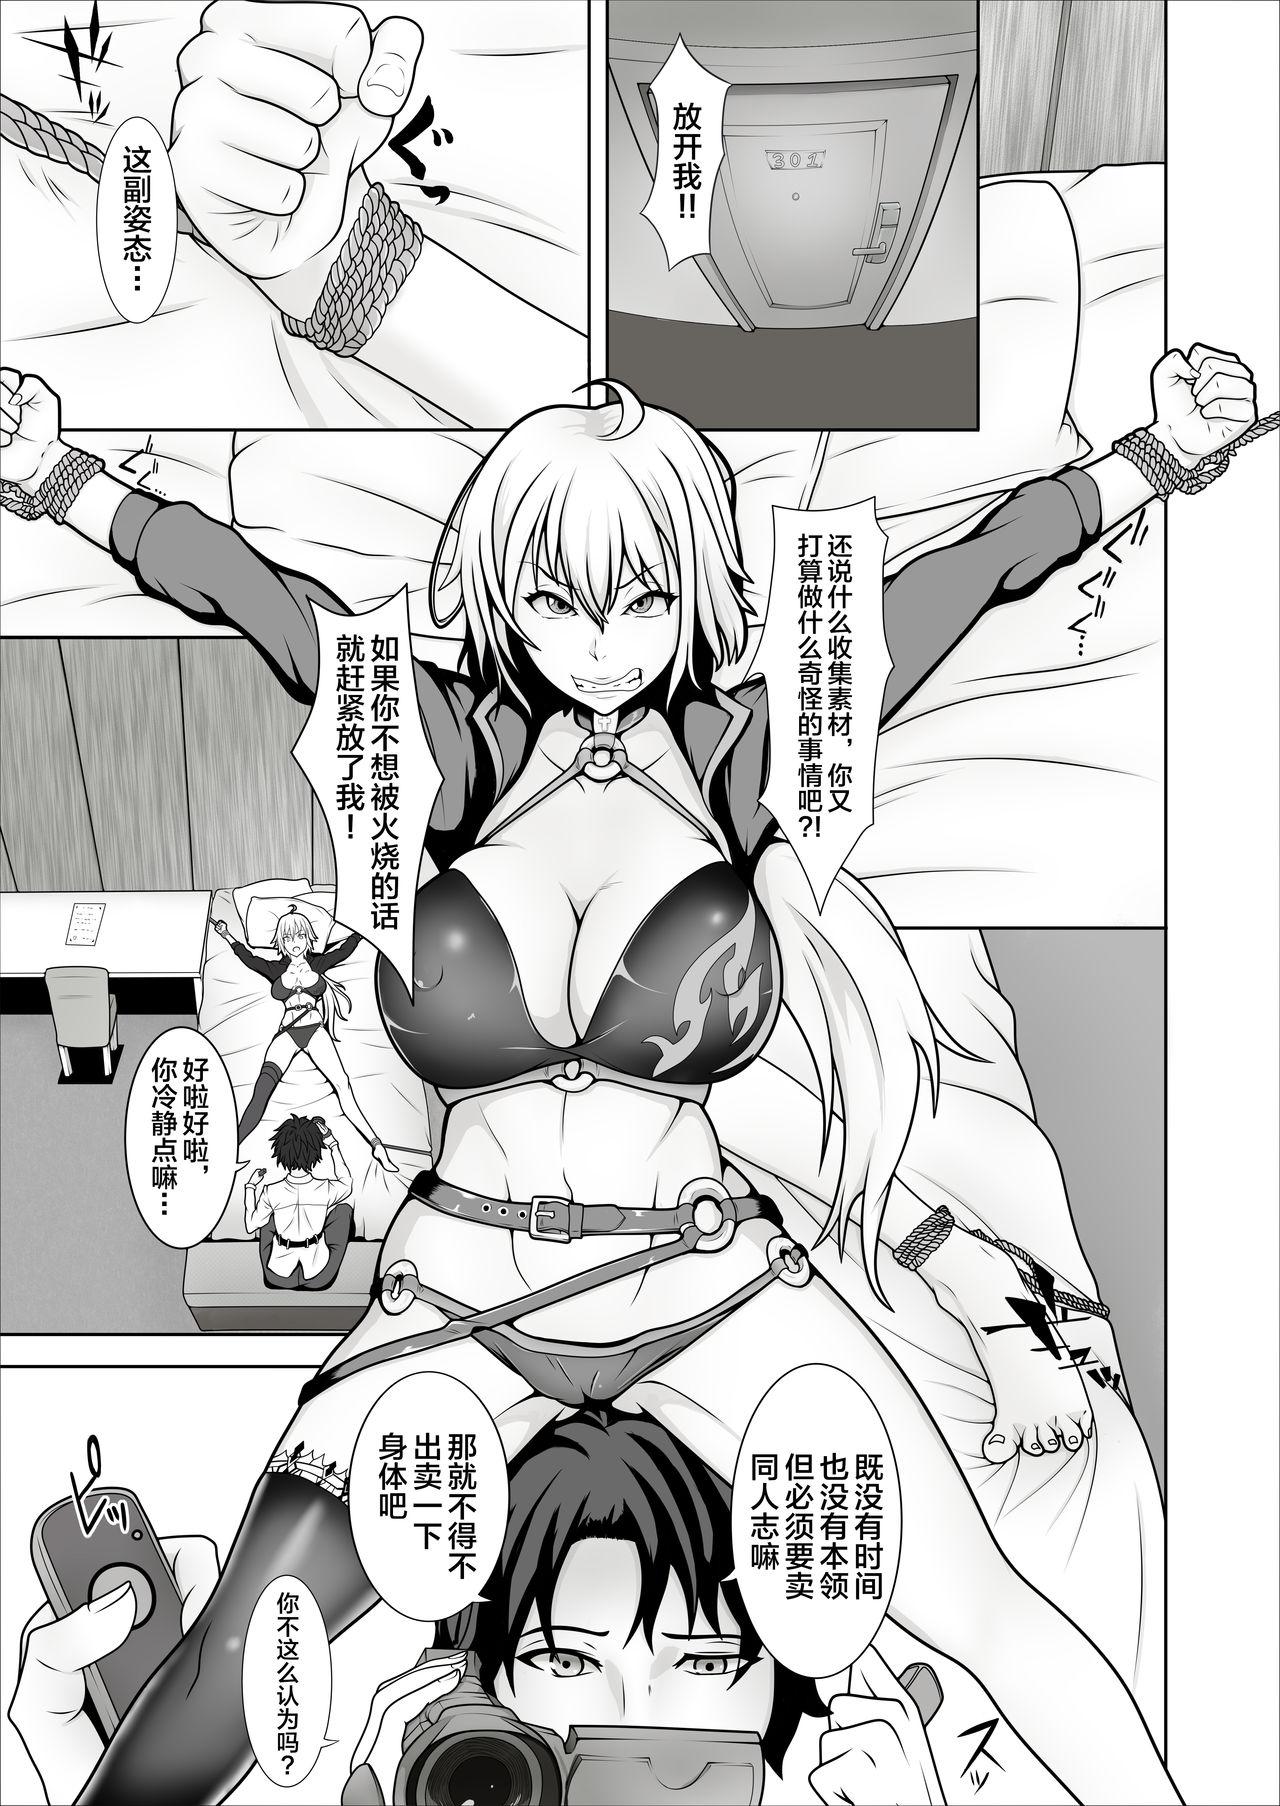 Pete 俺のジャンヌは性処理係 - Fate grand order Vagina - Page 11